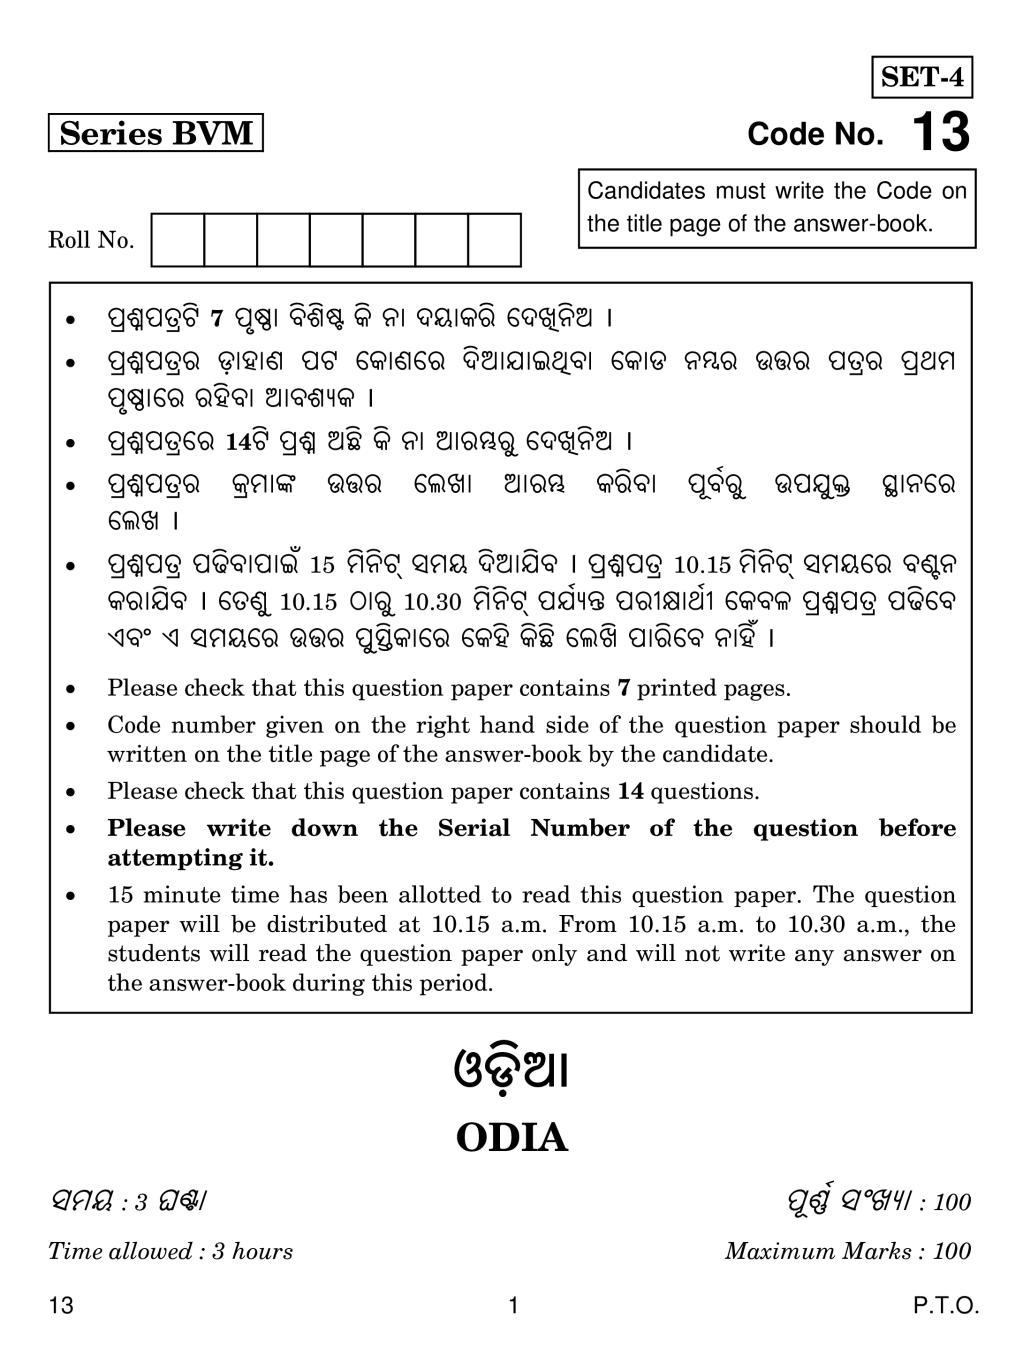 CBSE Class 12 Odia Question Paper 2019 - Page 1